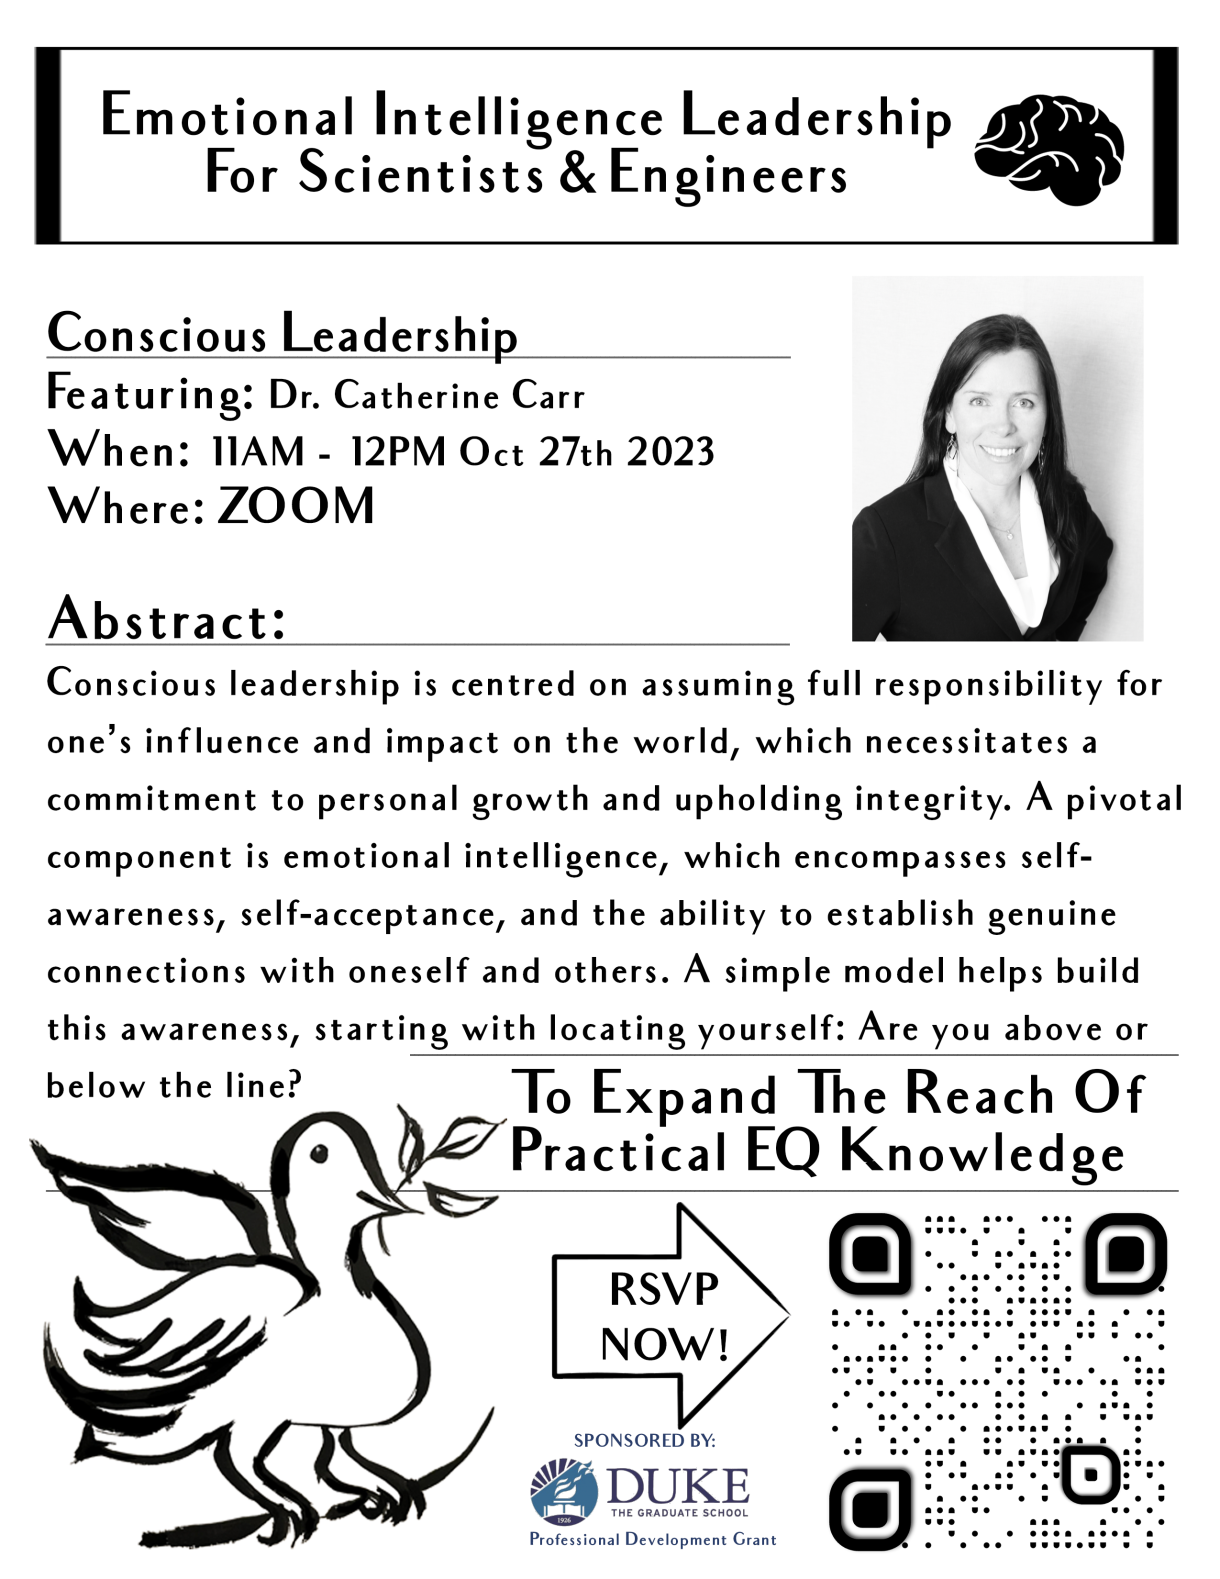 Conscious Leadership talk with Dr. Catherine Carr October 27, 2023